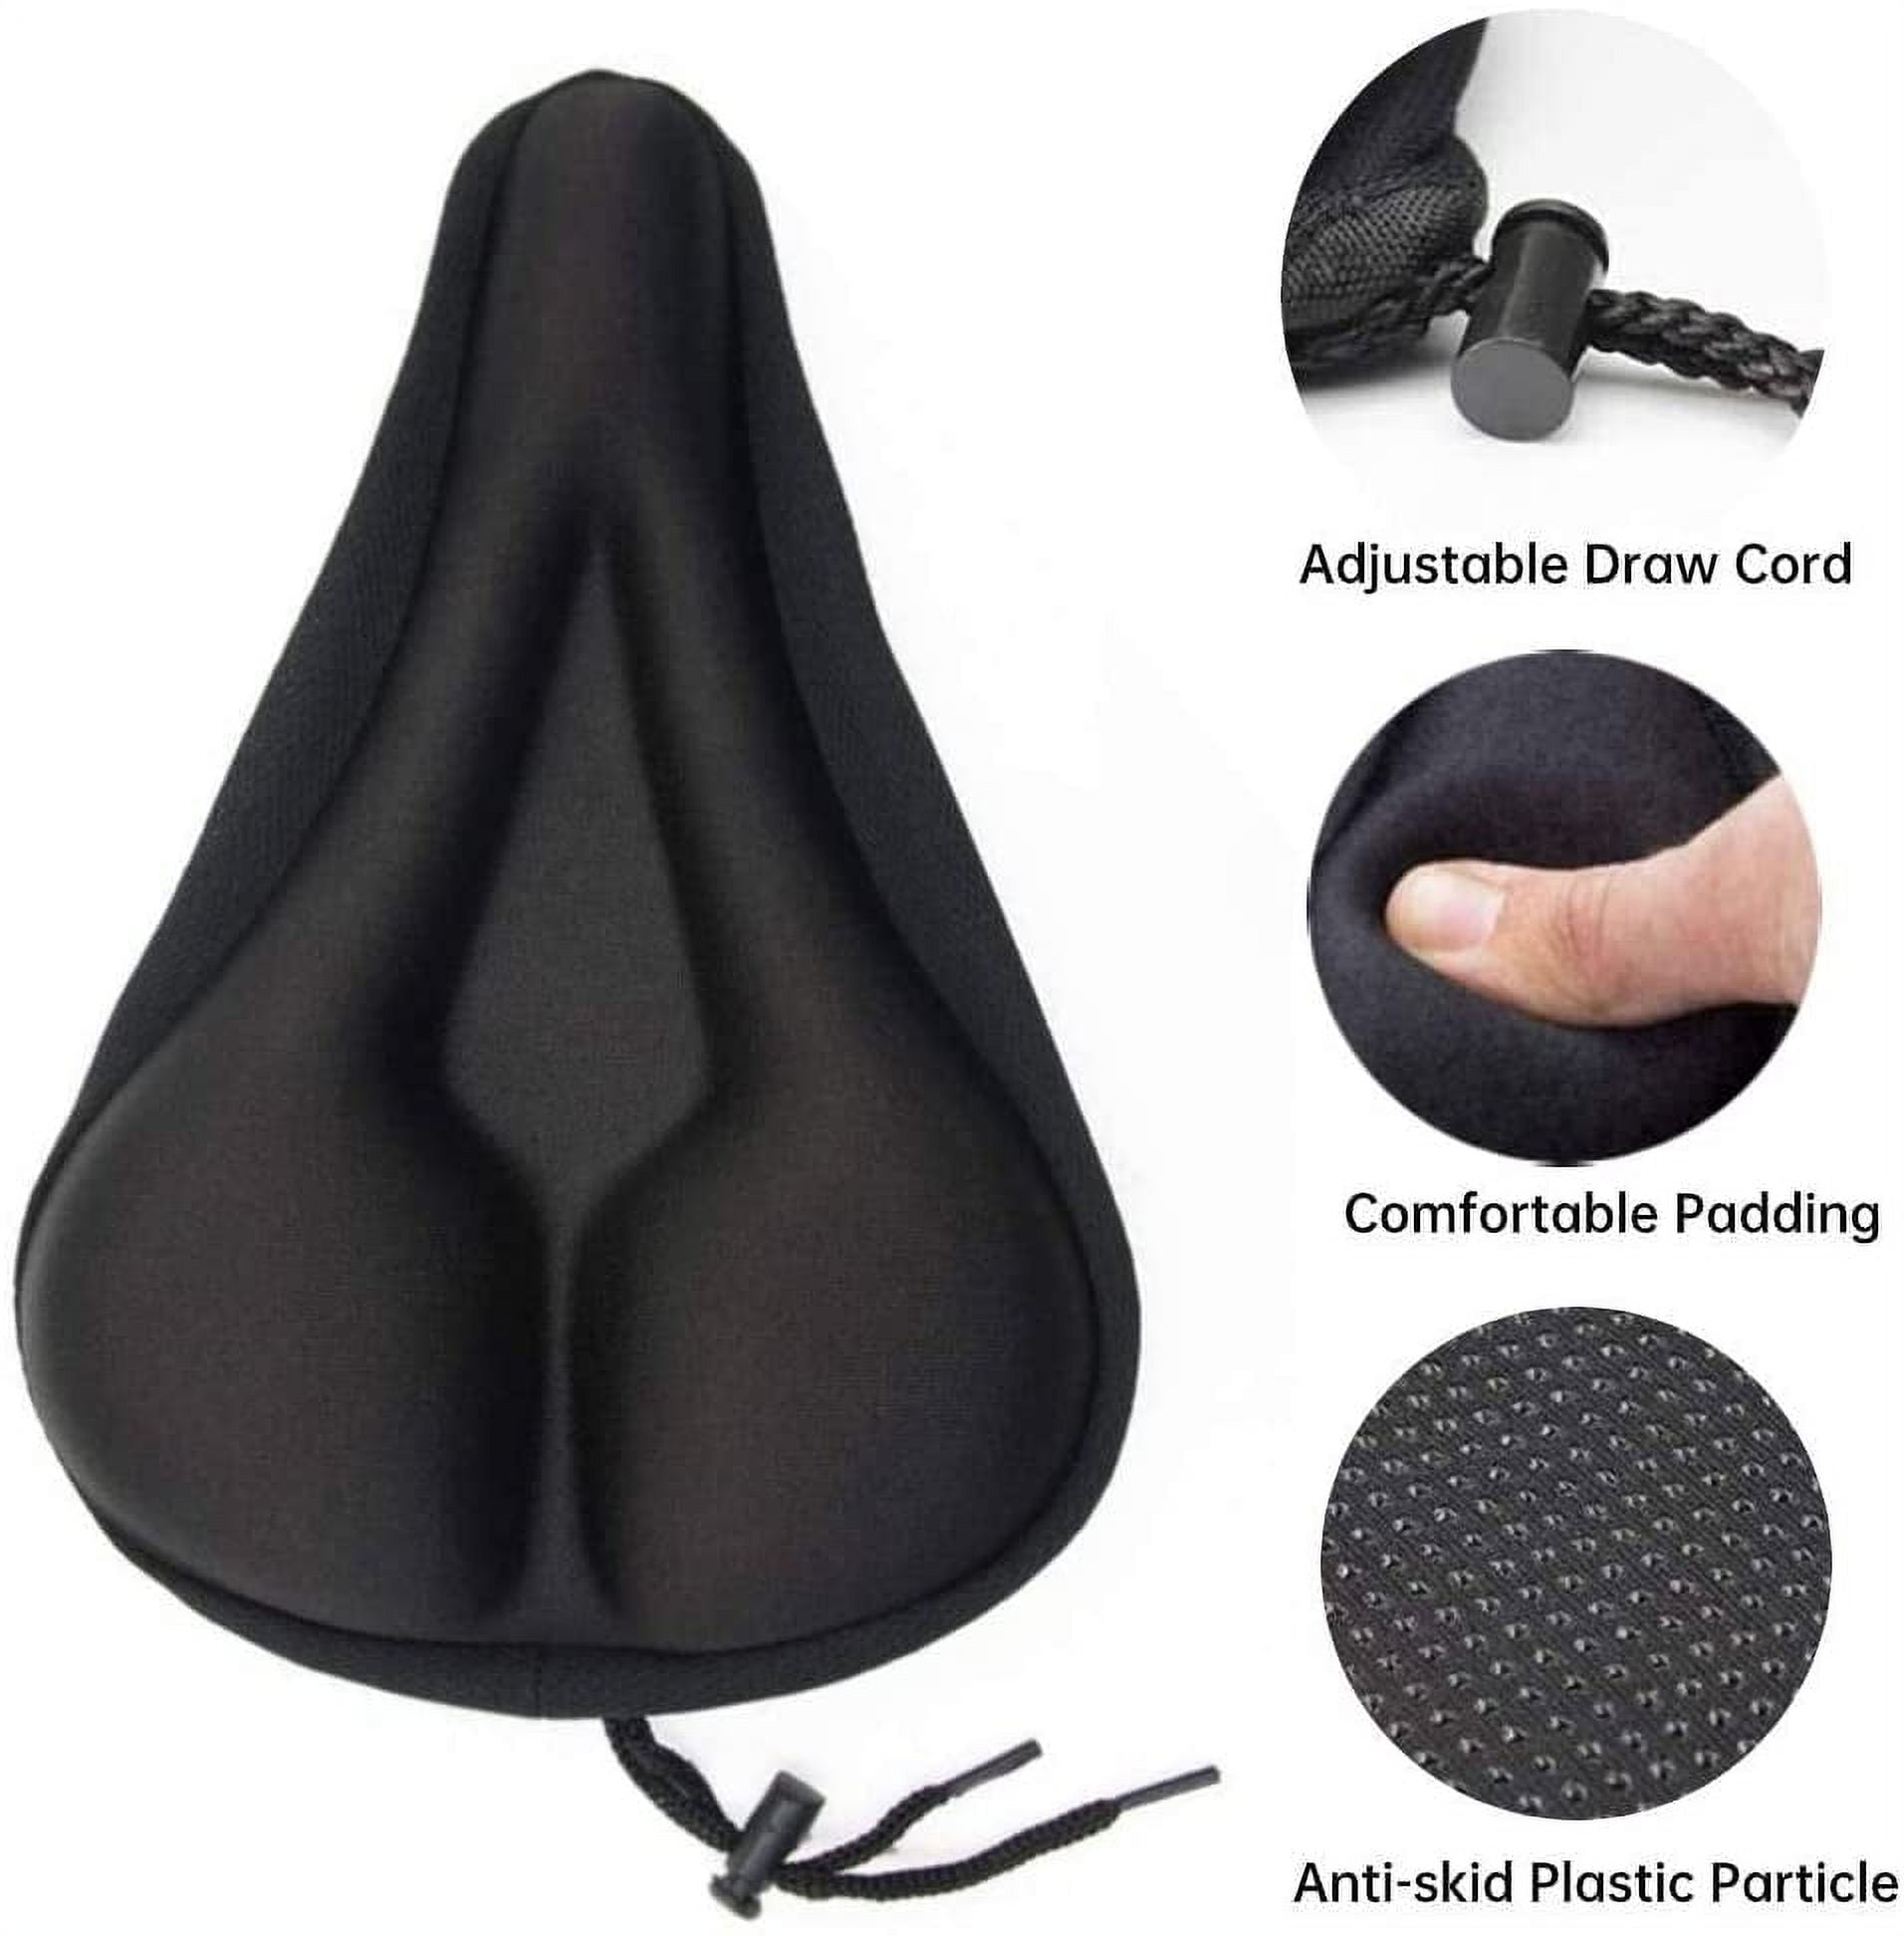 SZMXSS Mountain Bike Seat Cushion Cover, Extra Soft Gel Bicycle Seat Cover for Peloton, Soft Silicone Padded Bike Saddle Cover, Upgraded Bicycle Seat Cushion